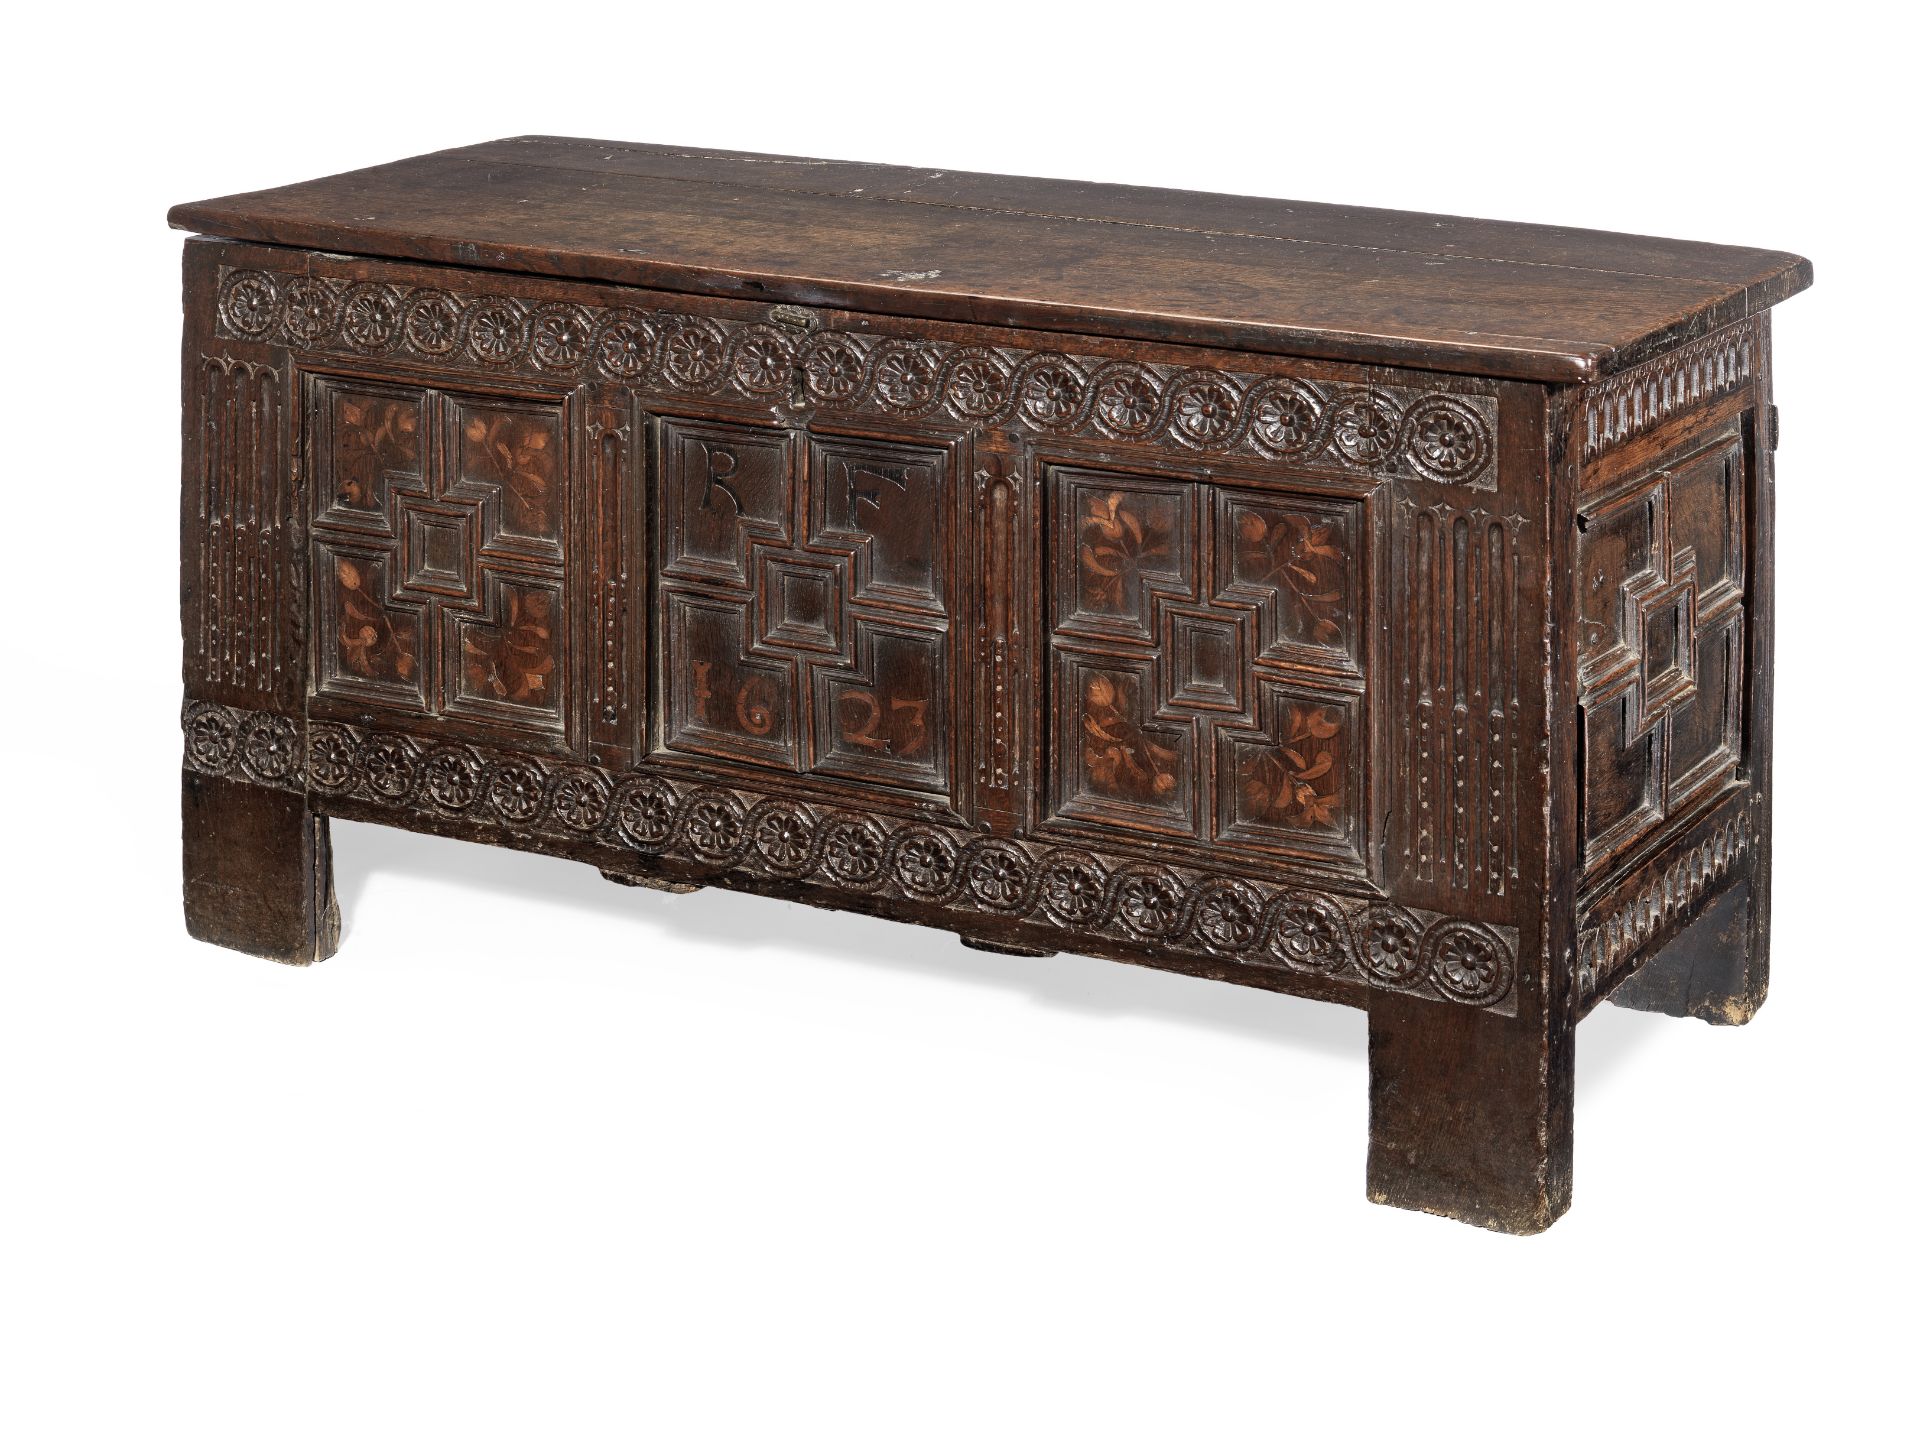 A fine James I joined oak and inlaid coffer, dated 1623